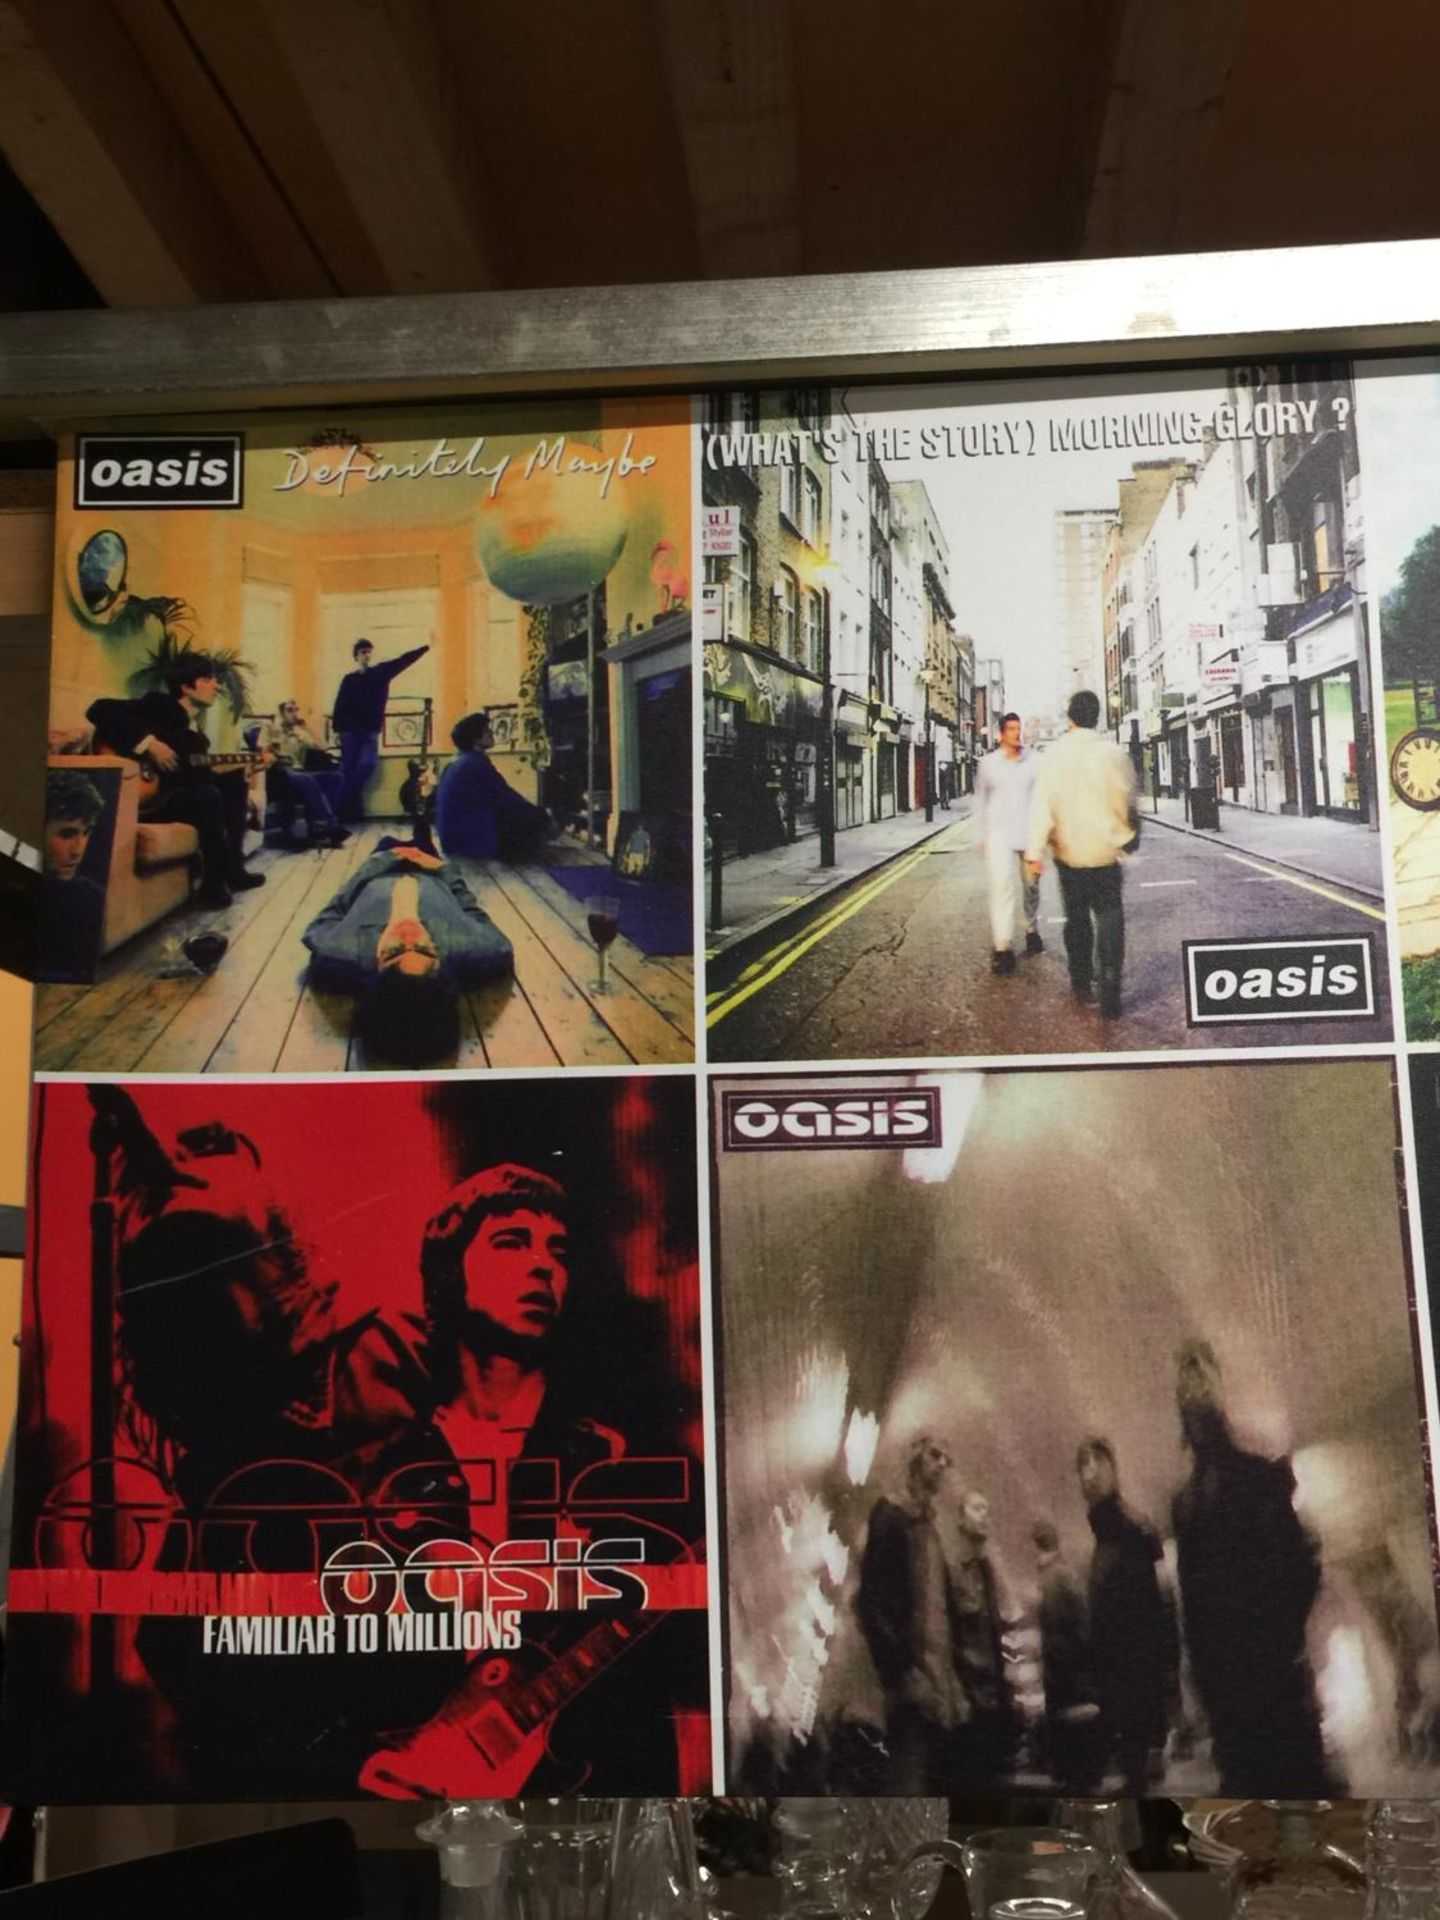 A LARGE CANVAS OF OASIS ALBUM COVERS - 122 X 51 CM - Image 2 of 3